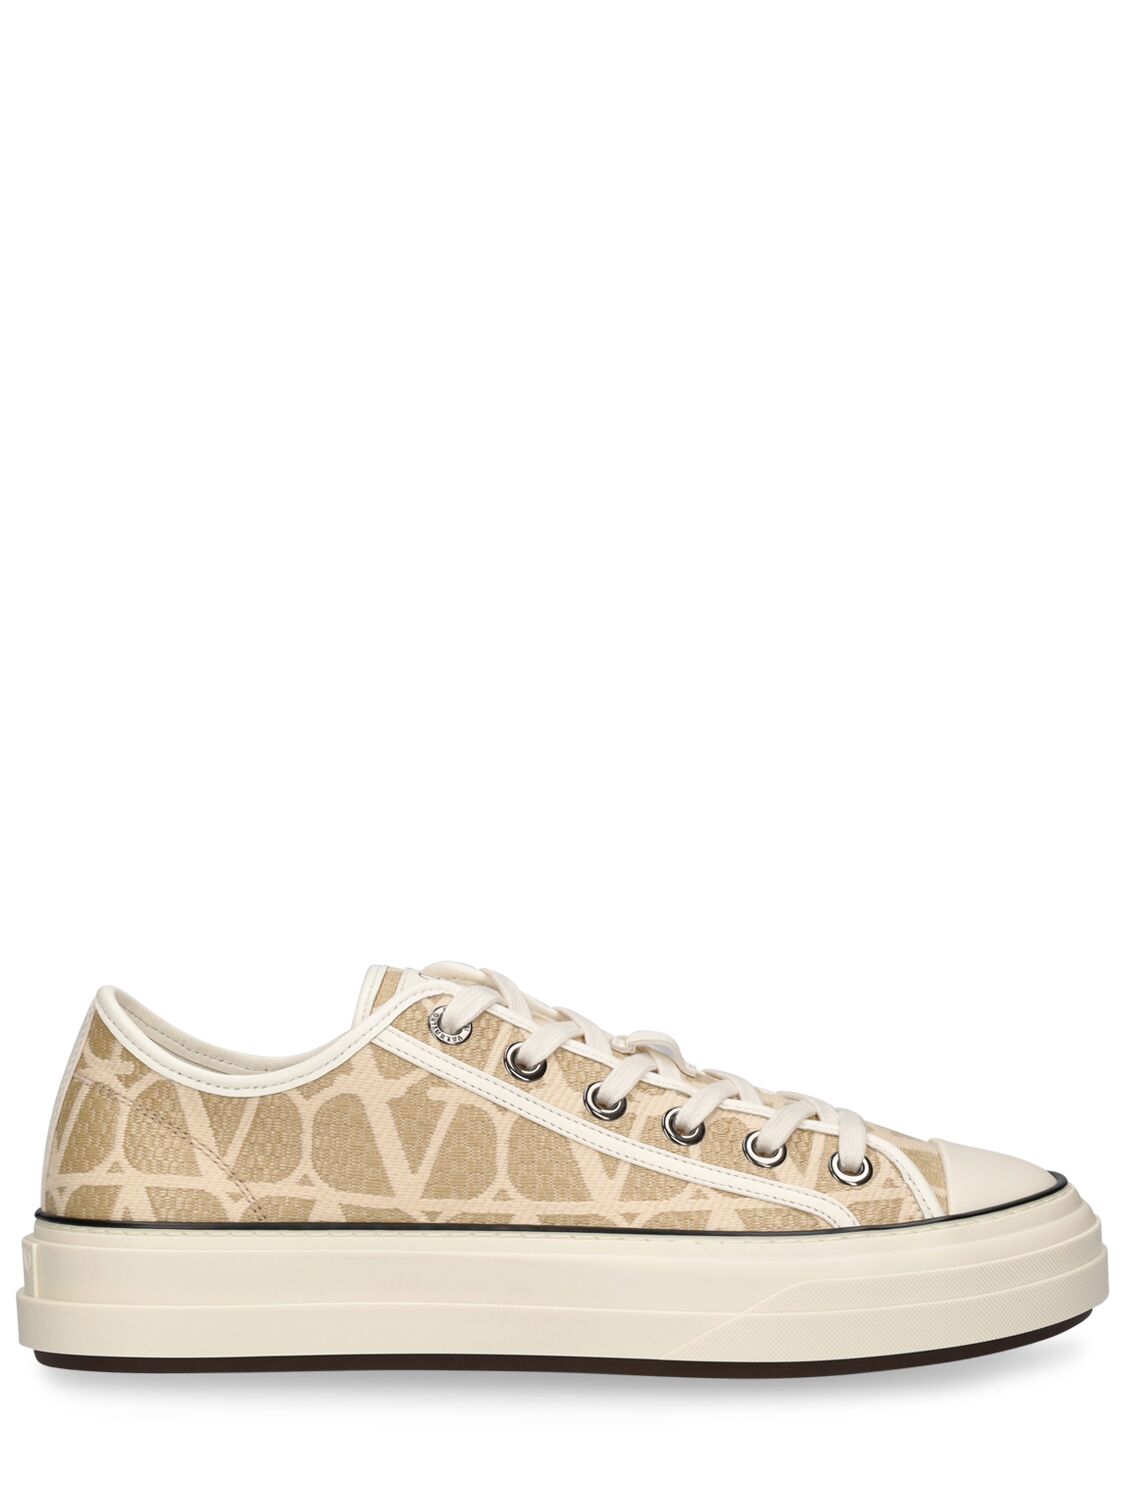 Image of Toile Iconographe Woven Sneakers